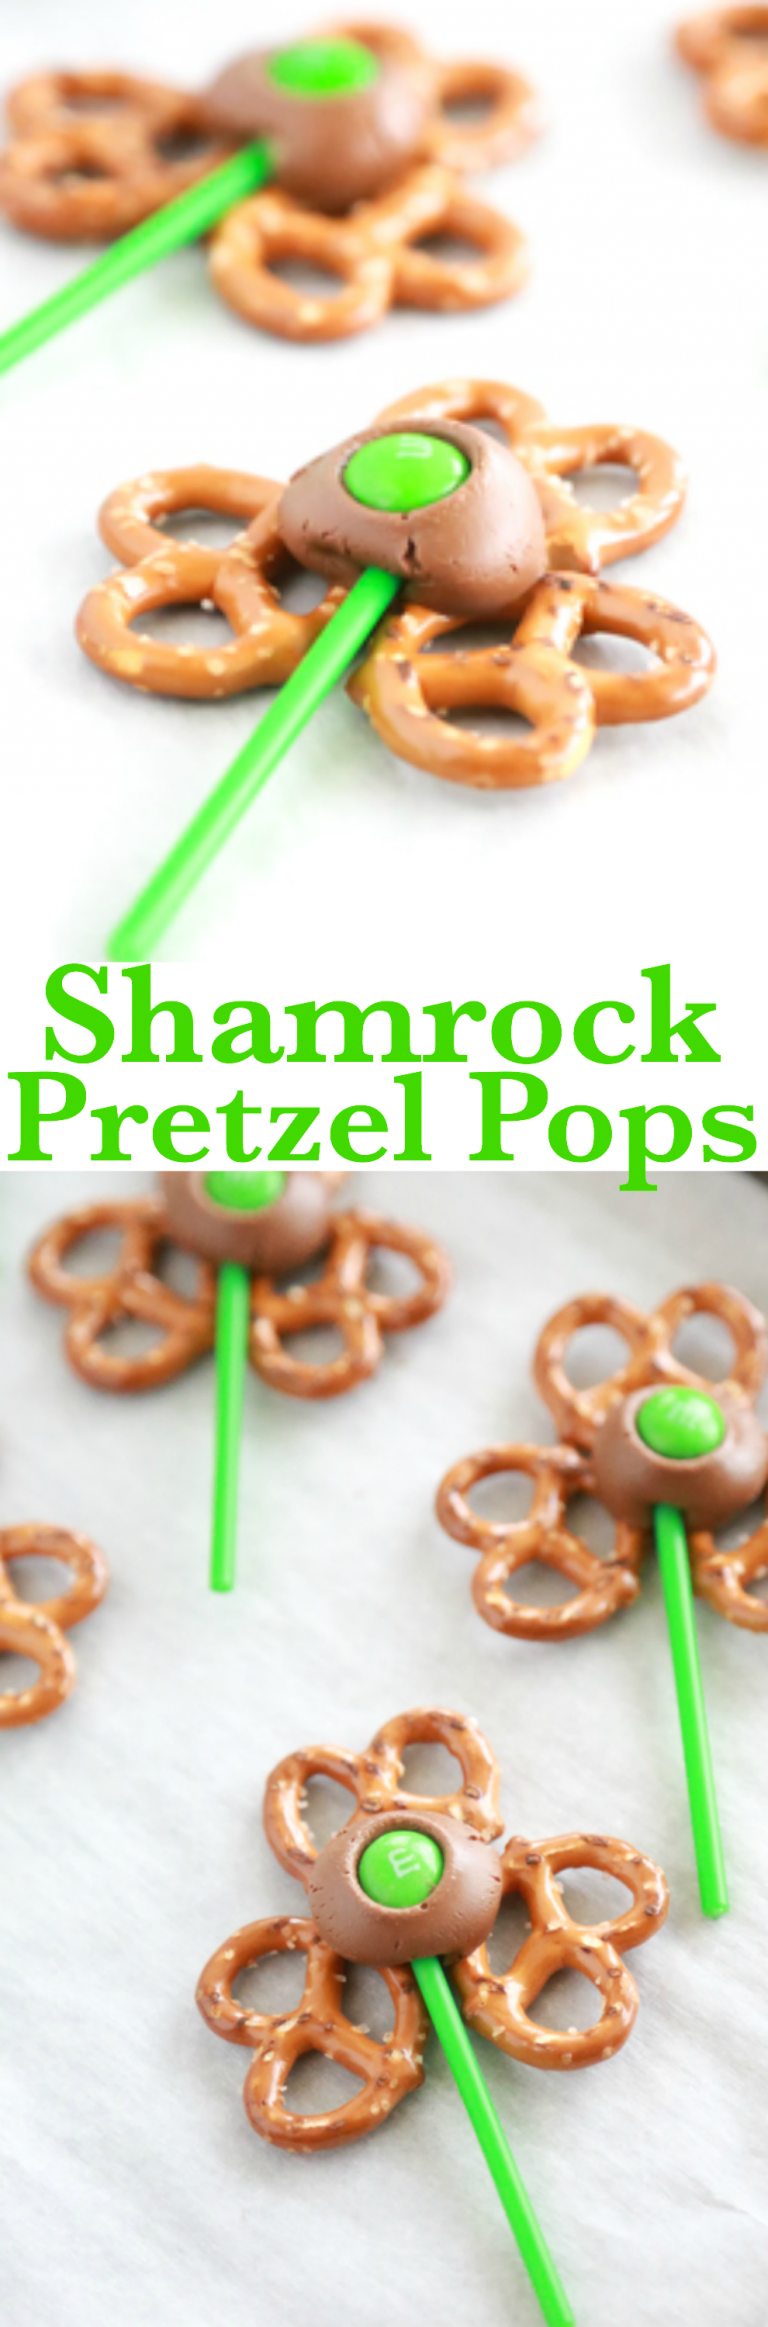 Shamrock Pretzel Pops for St. Patrick's Day | Simply Being Mommy